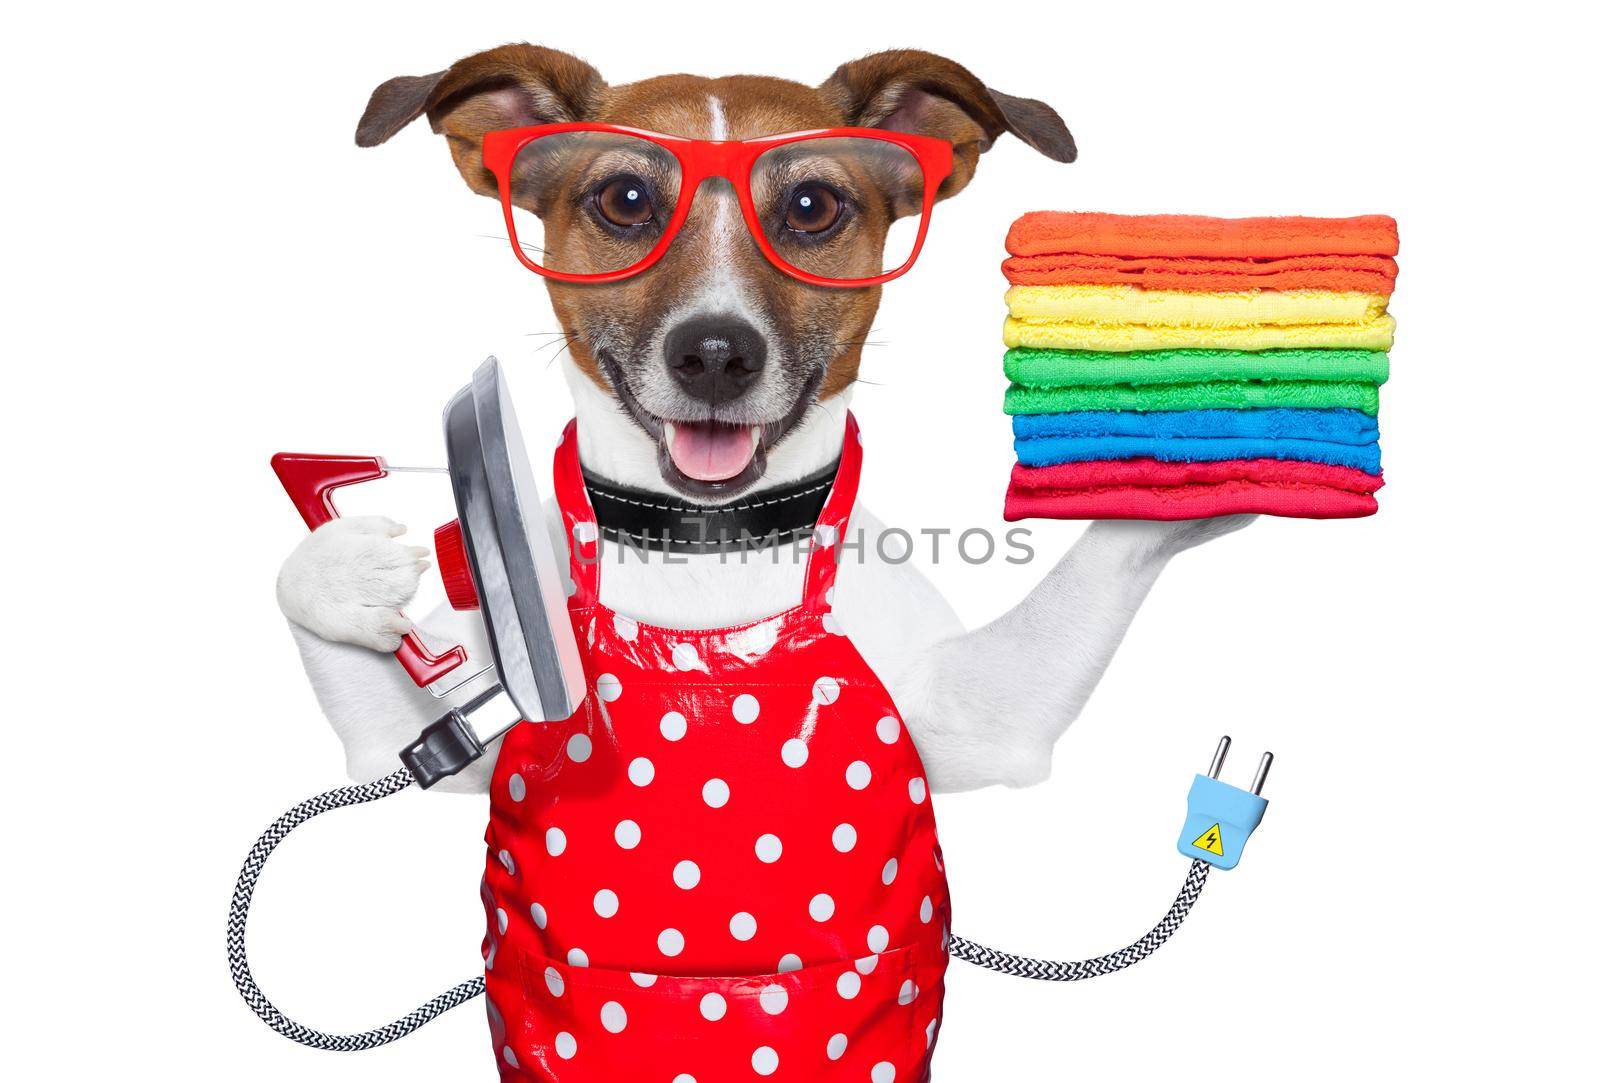 housewife dog ironing with a red apron and a stack of colorful towels